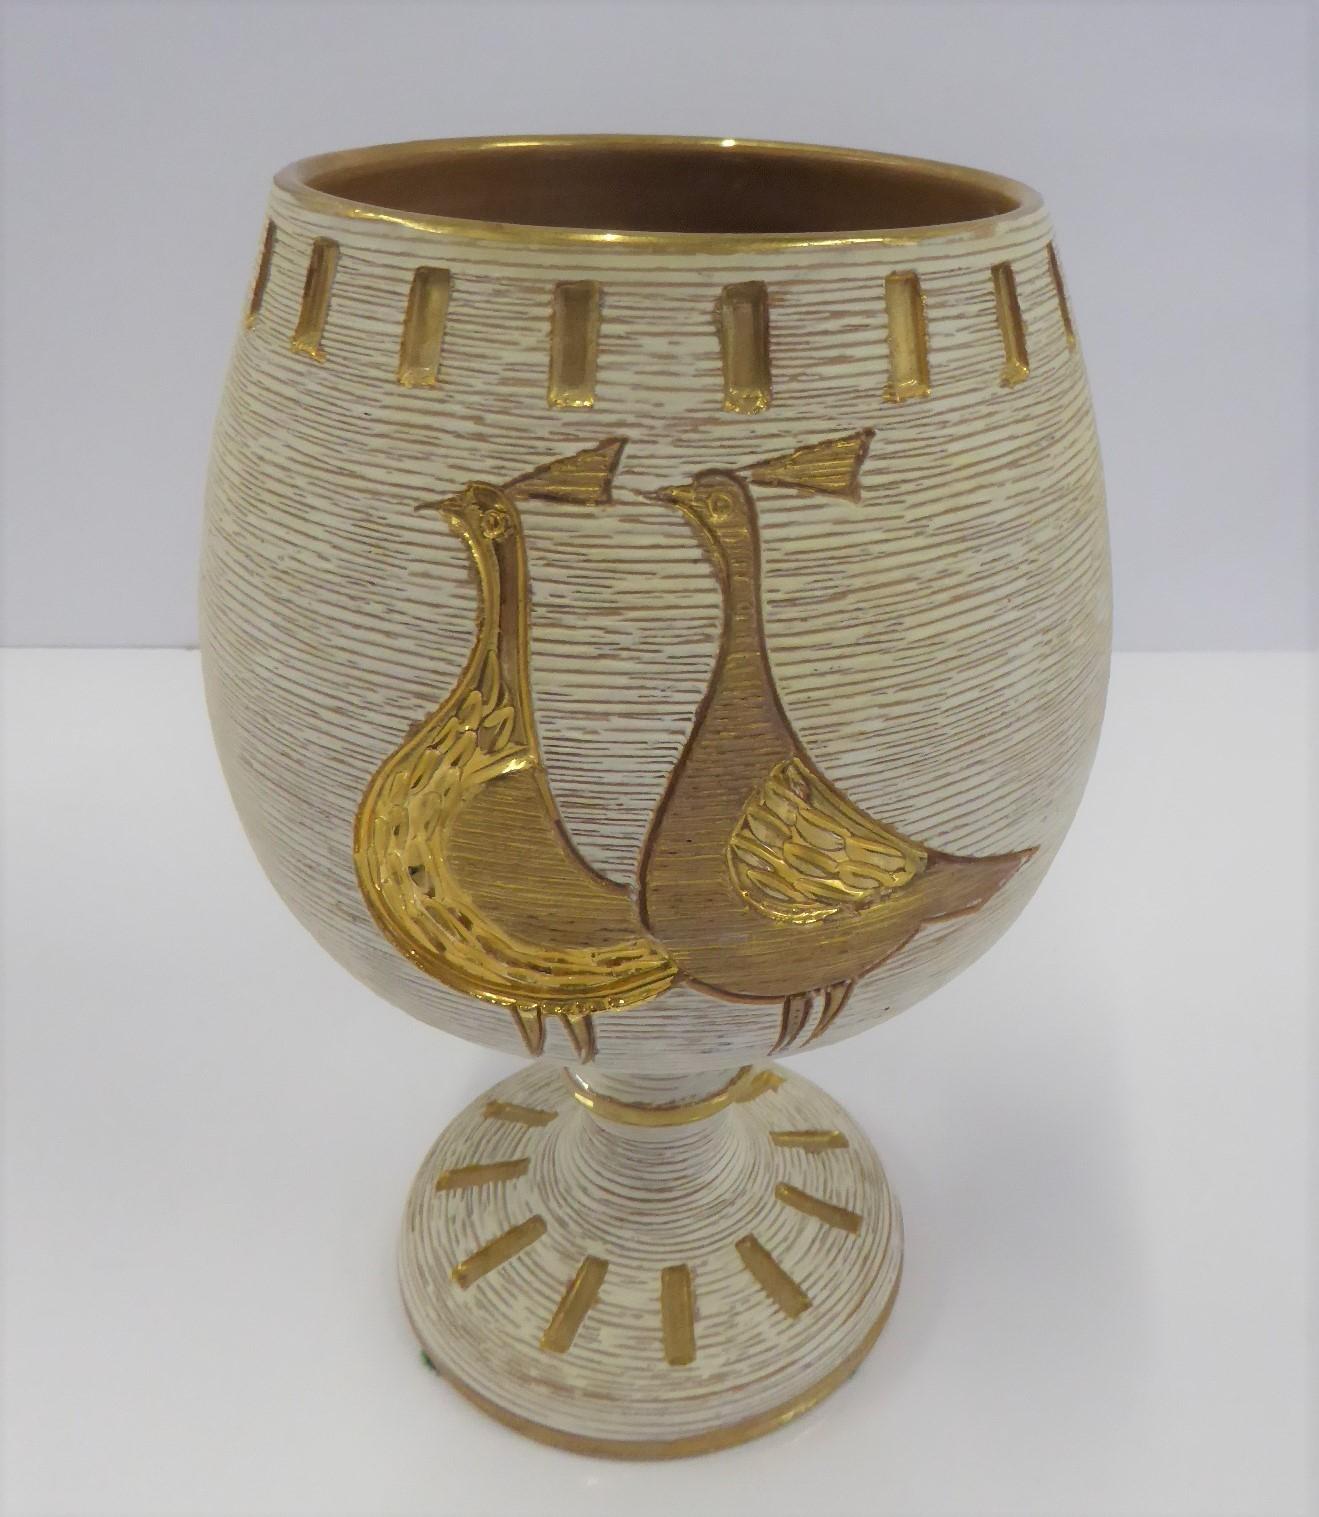 REDUCED FROM $325....Italian Modern Chalice shaped textured pottery vase by Fratelli Fanciullacci  from the 1960s.  The hand painted vessel is decorated with gold colored pair of quail or pheasants on a creamy white background on one side.  The body